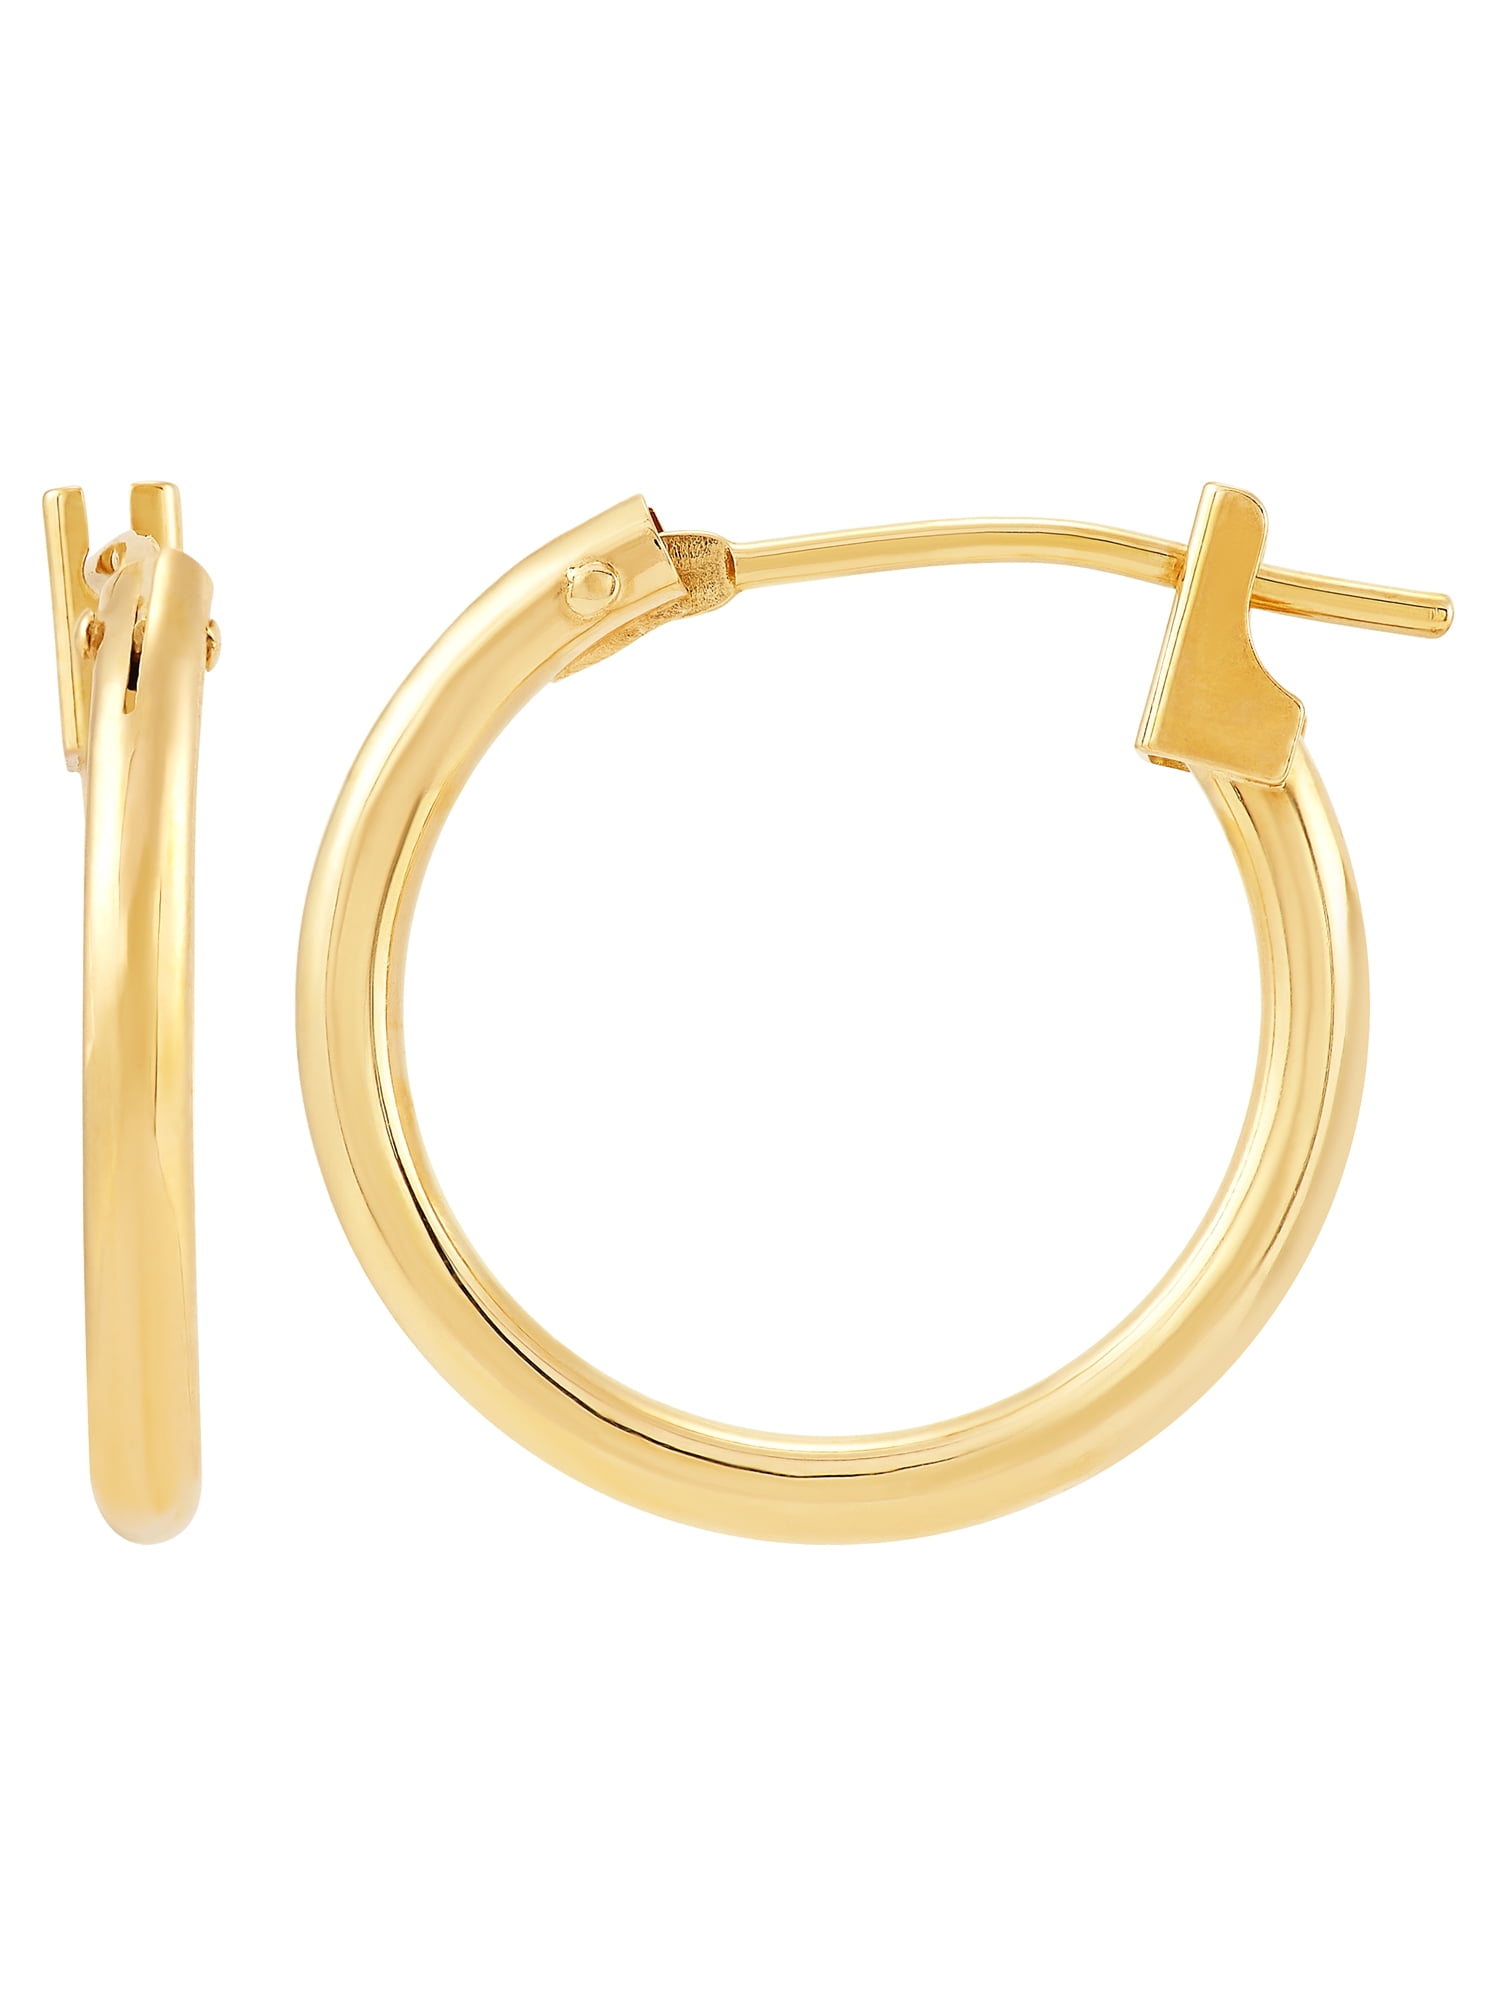 14k Yellow Gold 10mm Round Hoop Earrings Jewelry Gifts for Women